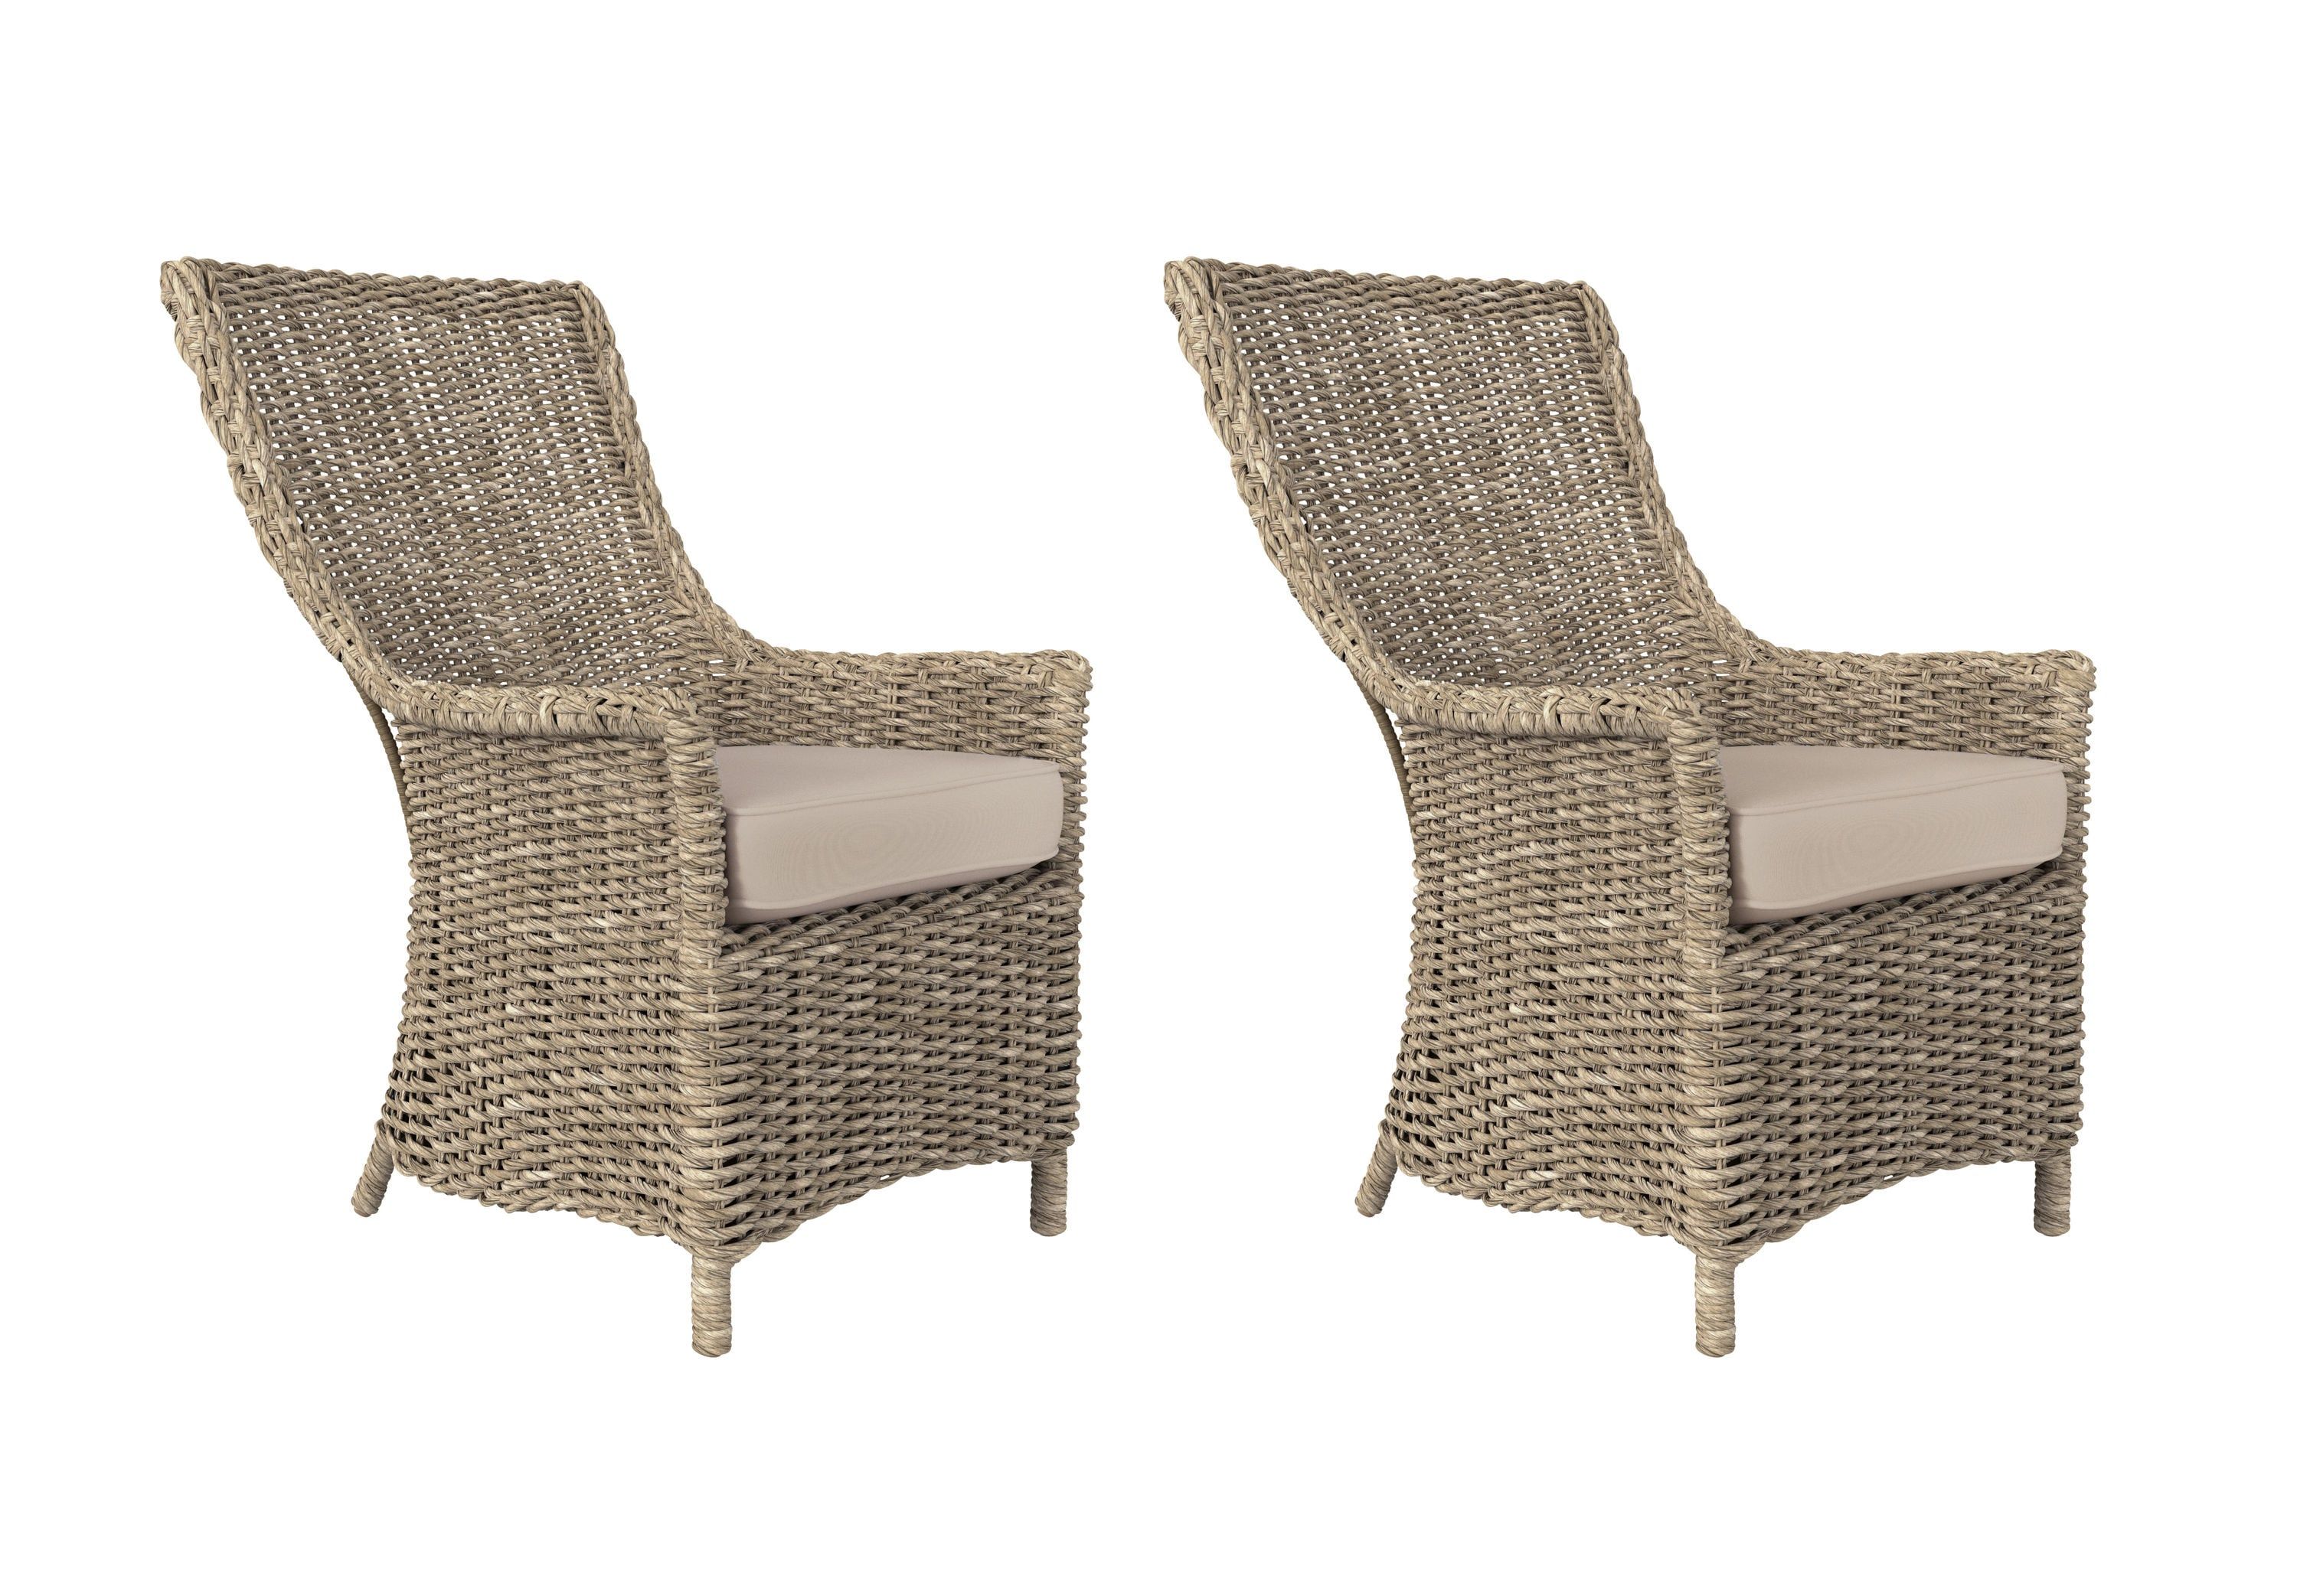 Set of 2 Wicker Dining Chairs